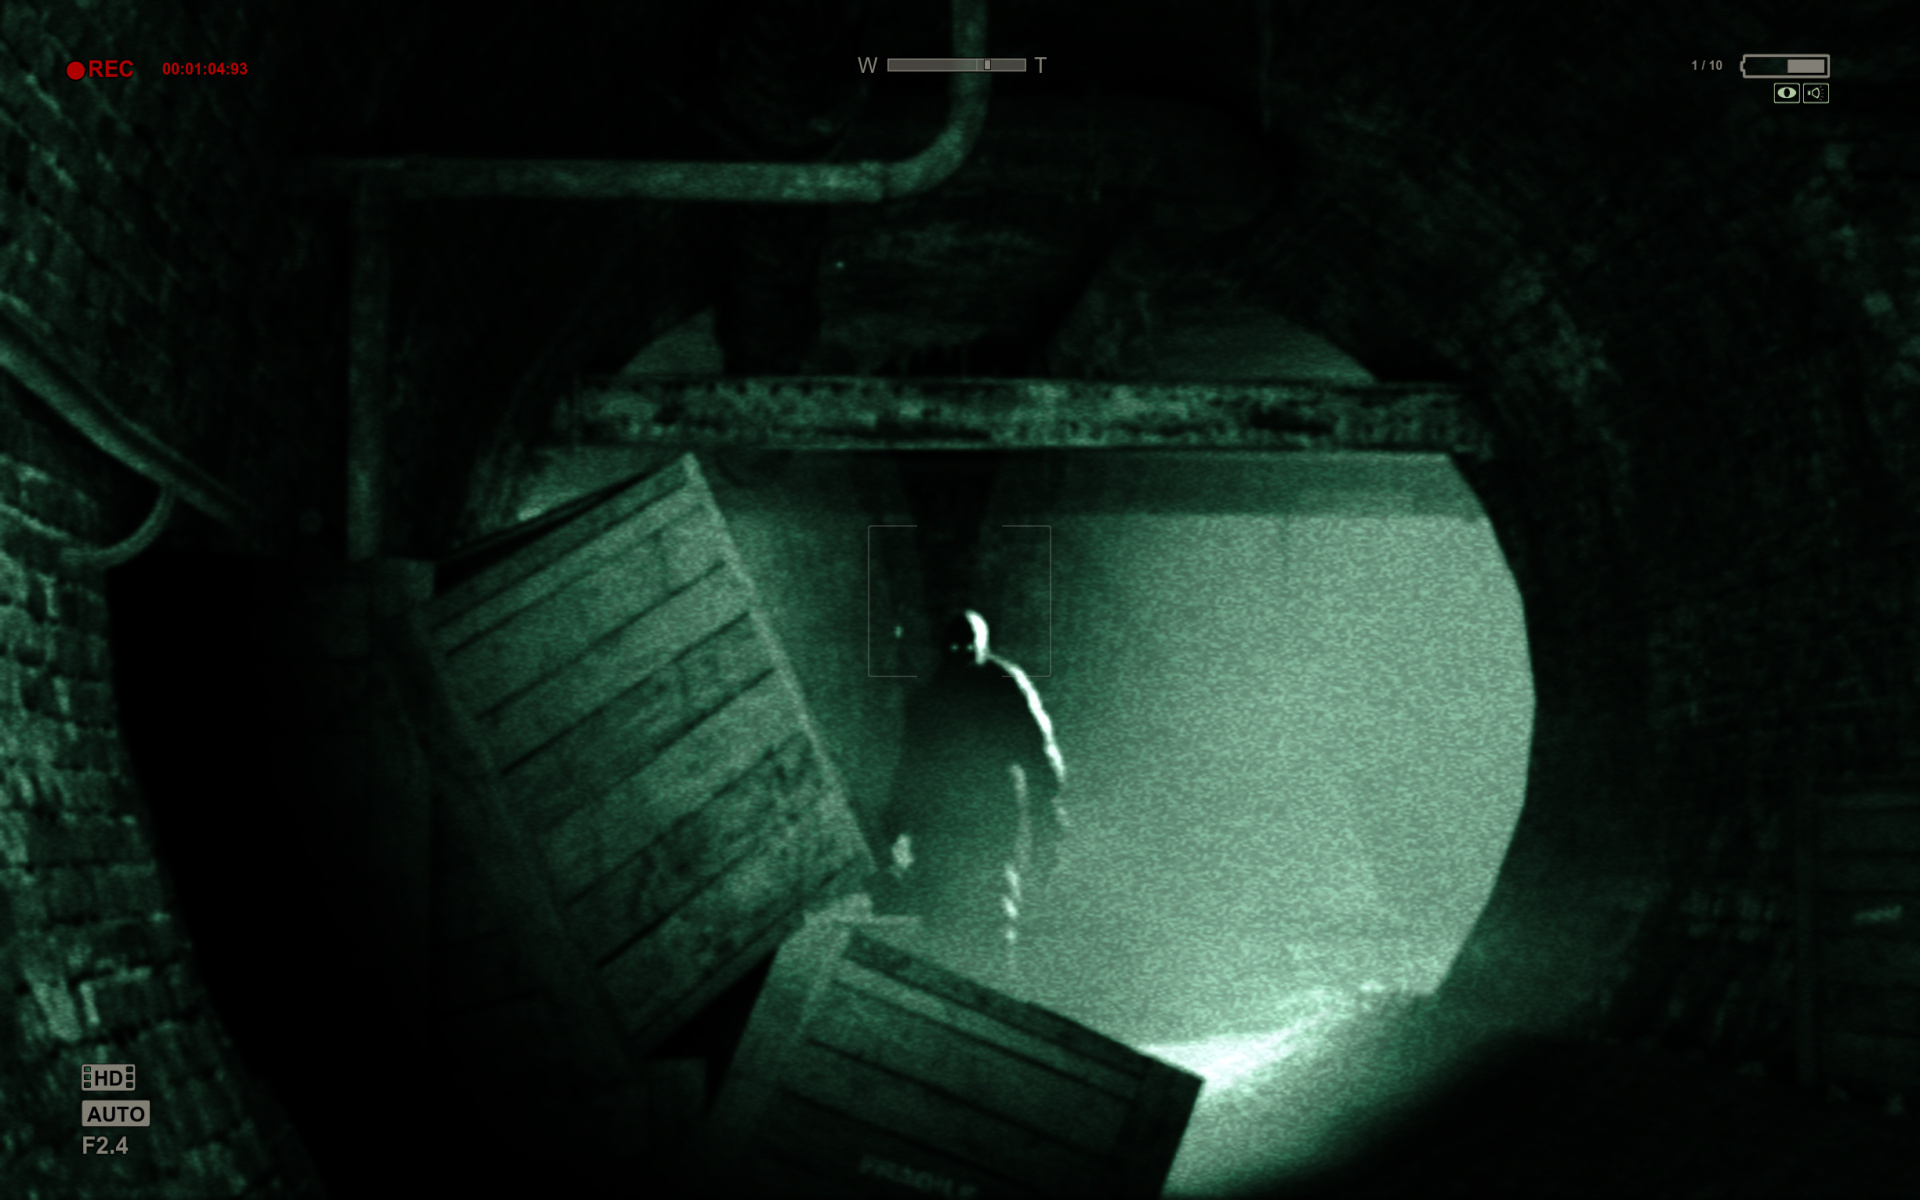 free download outlast 2 xbox one